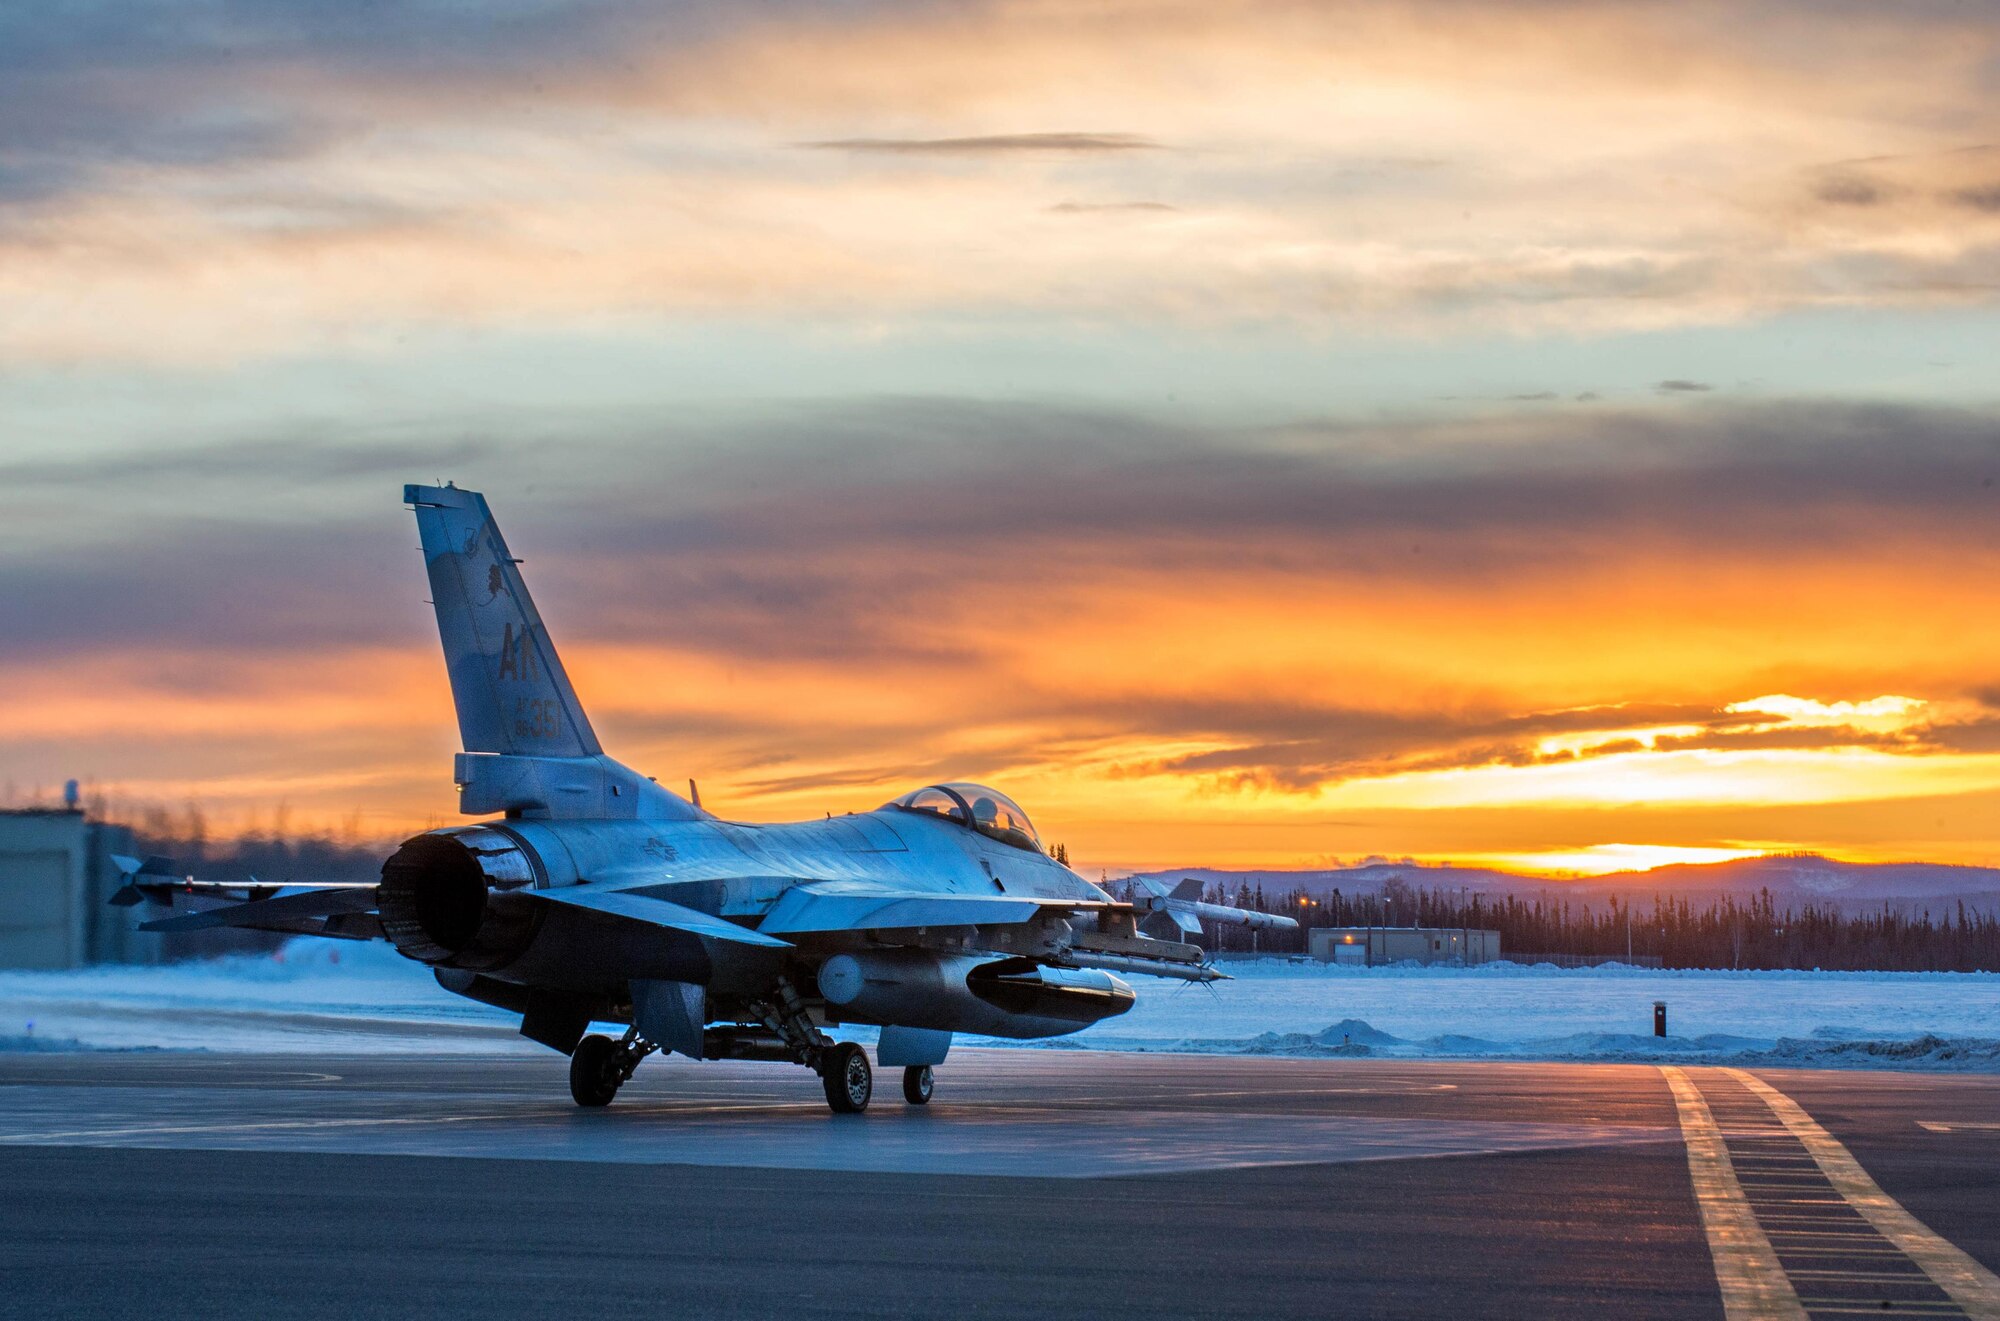 An F-16 Fighting Falcon with the 18th Aggressor Squadron prepares to take off from Eielson Air Force Base, Alaska, shortly after sunrise Jan. 24, 2016, in transit to Kadena Air Base, Japan, to participate in training exercises. More than 150 maintainers from the 354th Fighter Wing will keep the Aggressors in the air and prepare U.S. Airmen, Sailors and Marines for contingency operations along with coalition partners in the Pacific theater. (U.S. Air Force photo/Staff Sgt. Shawn Nickel)